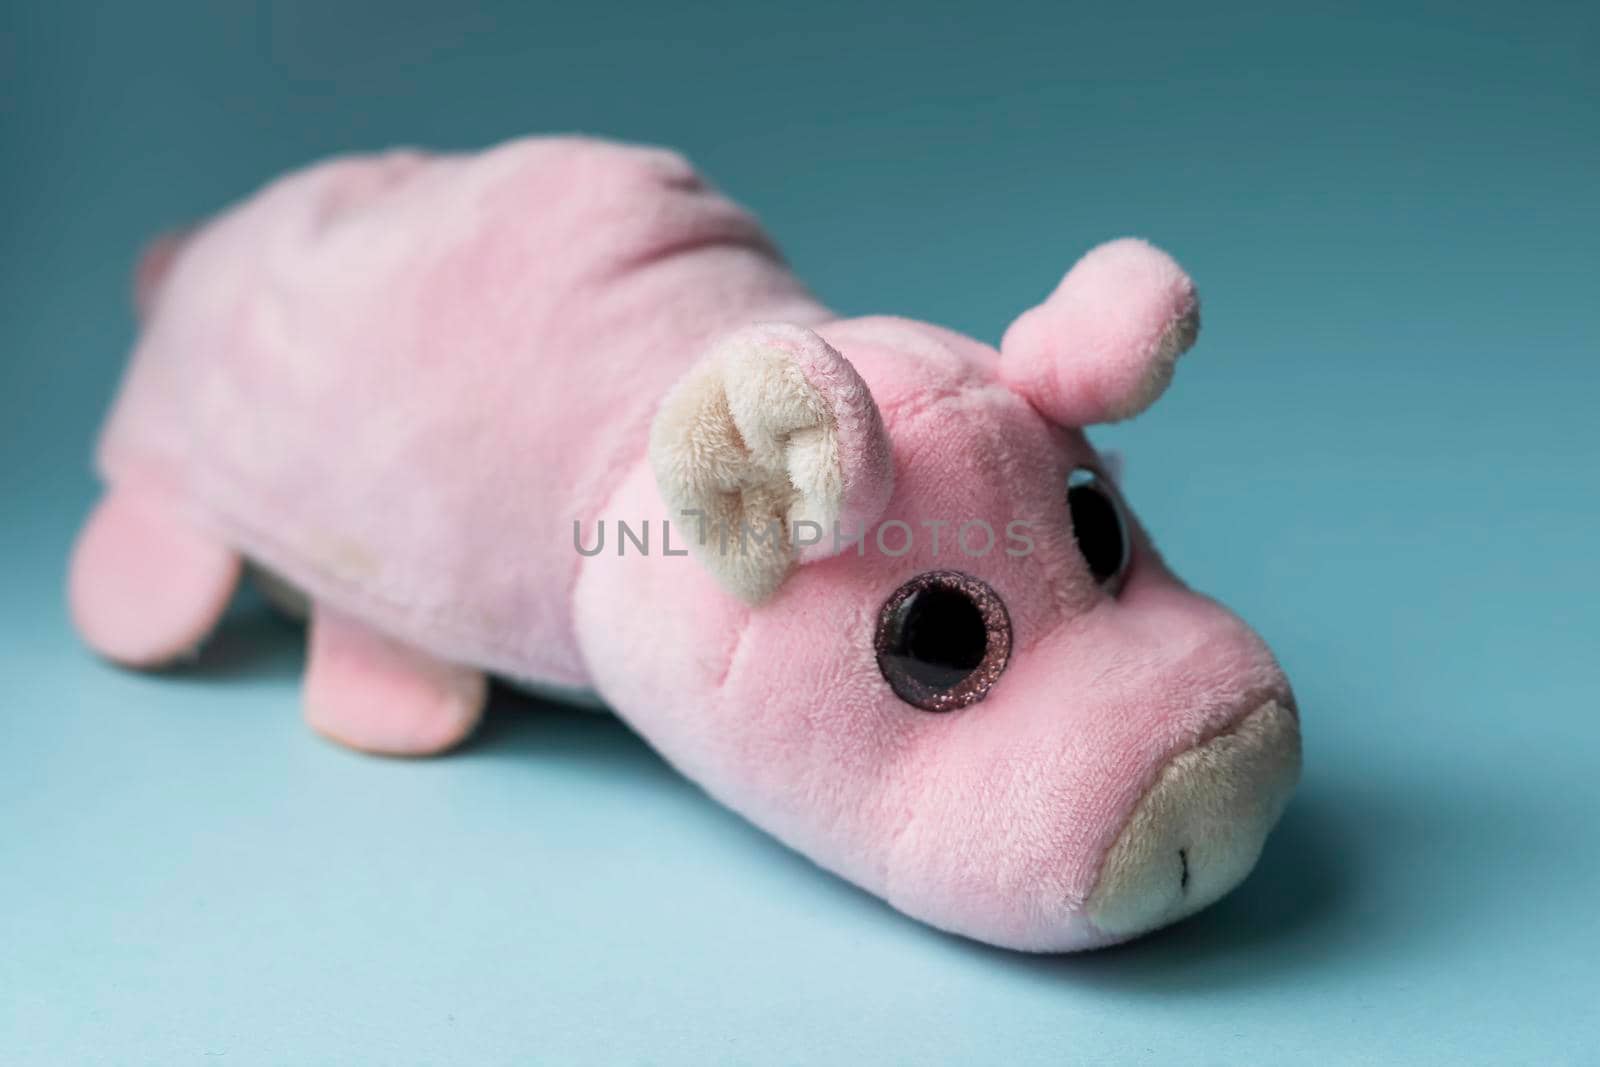 Plush toy pink pig on a blue background. Indoors, day light Front view. by Essffes